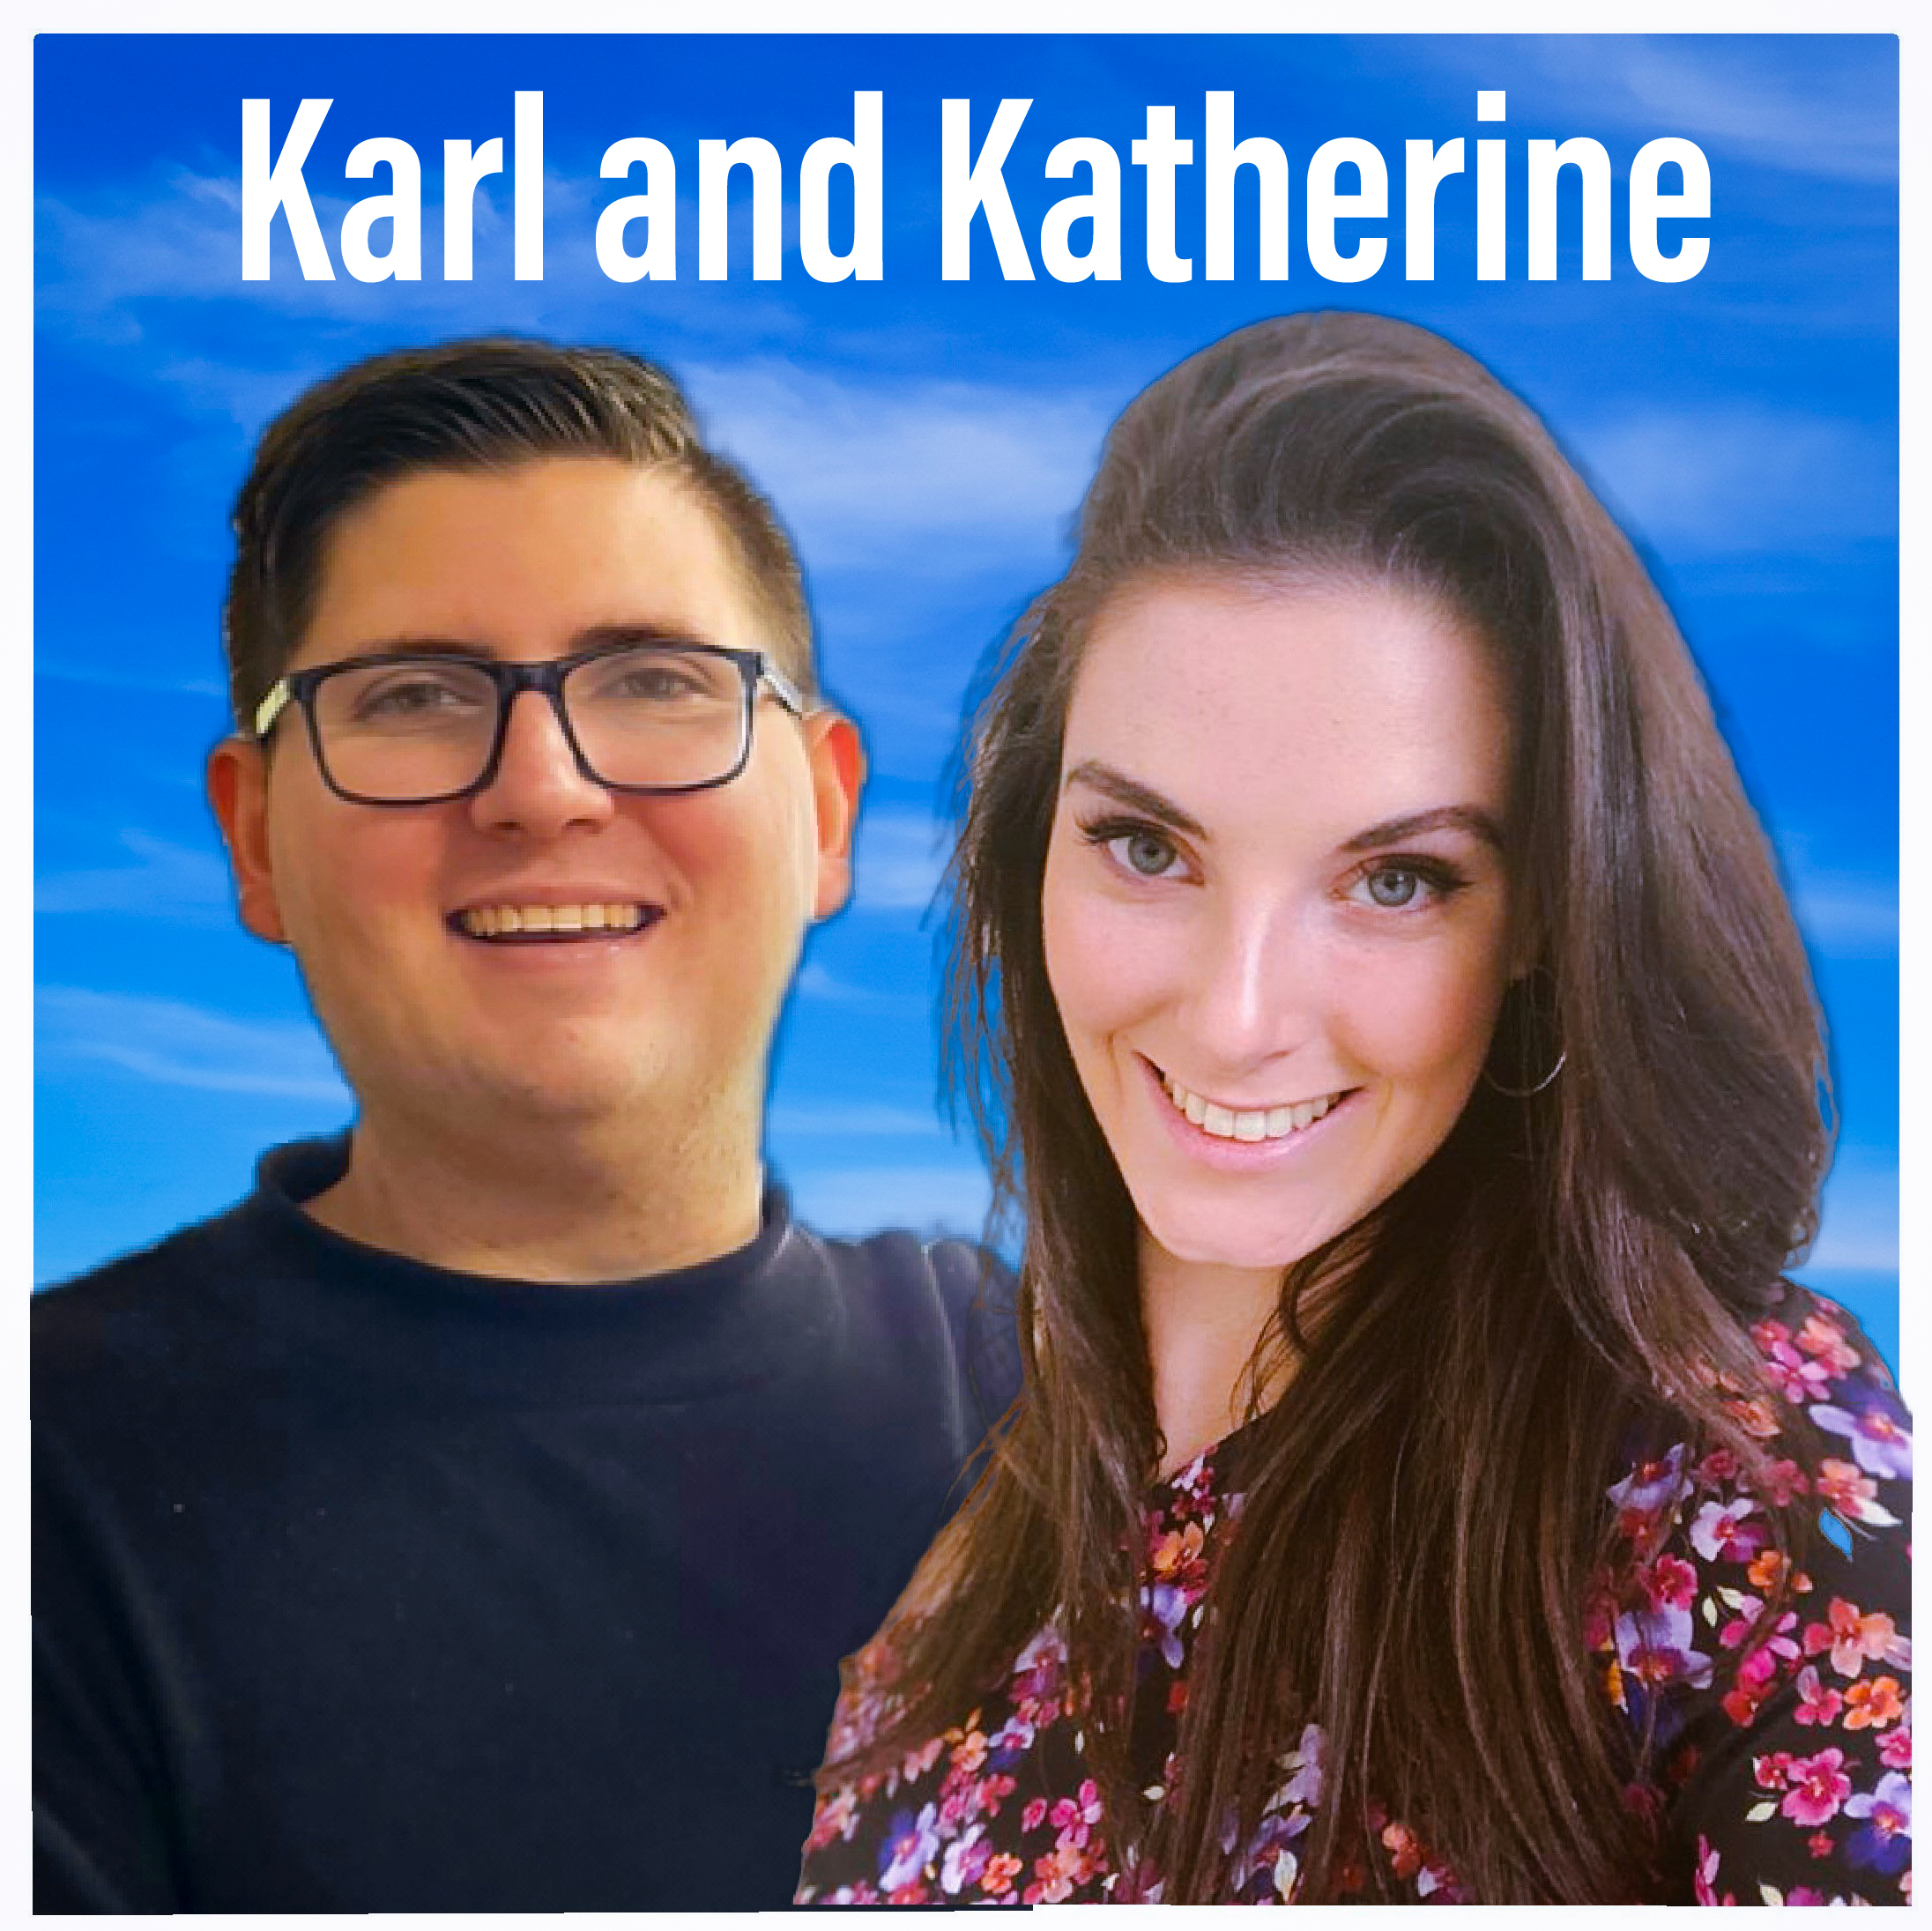 Karl and Katherine - Monday 18th October 2021